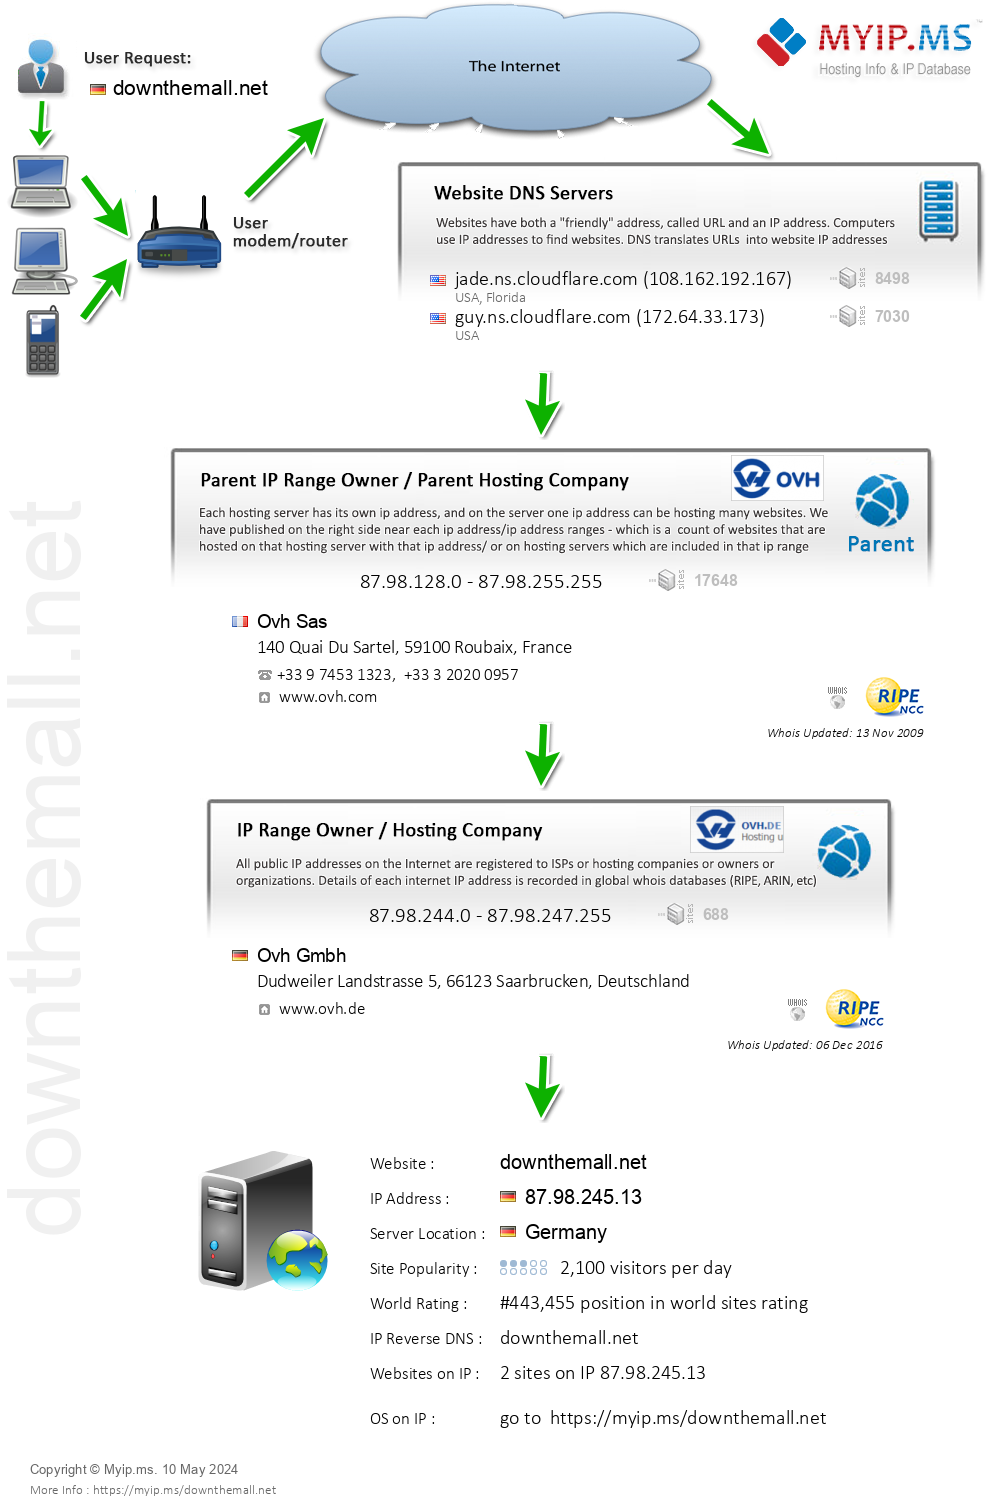 Downthemall.net - Website Hosting Visual IP Diagram